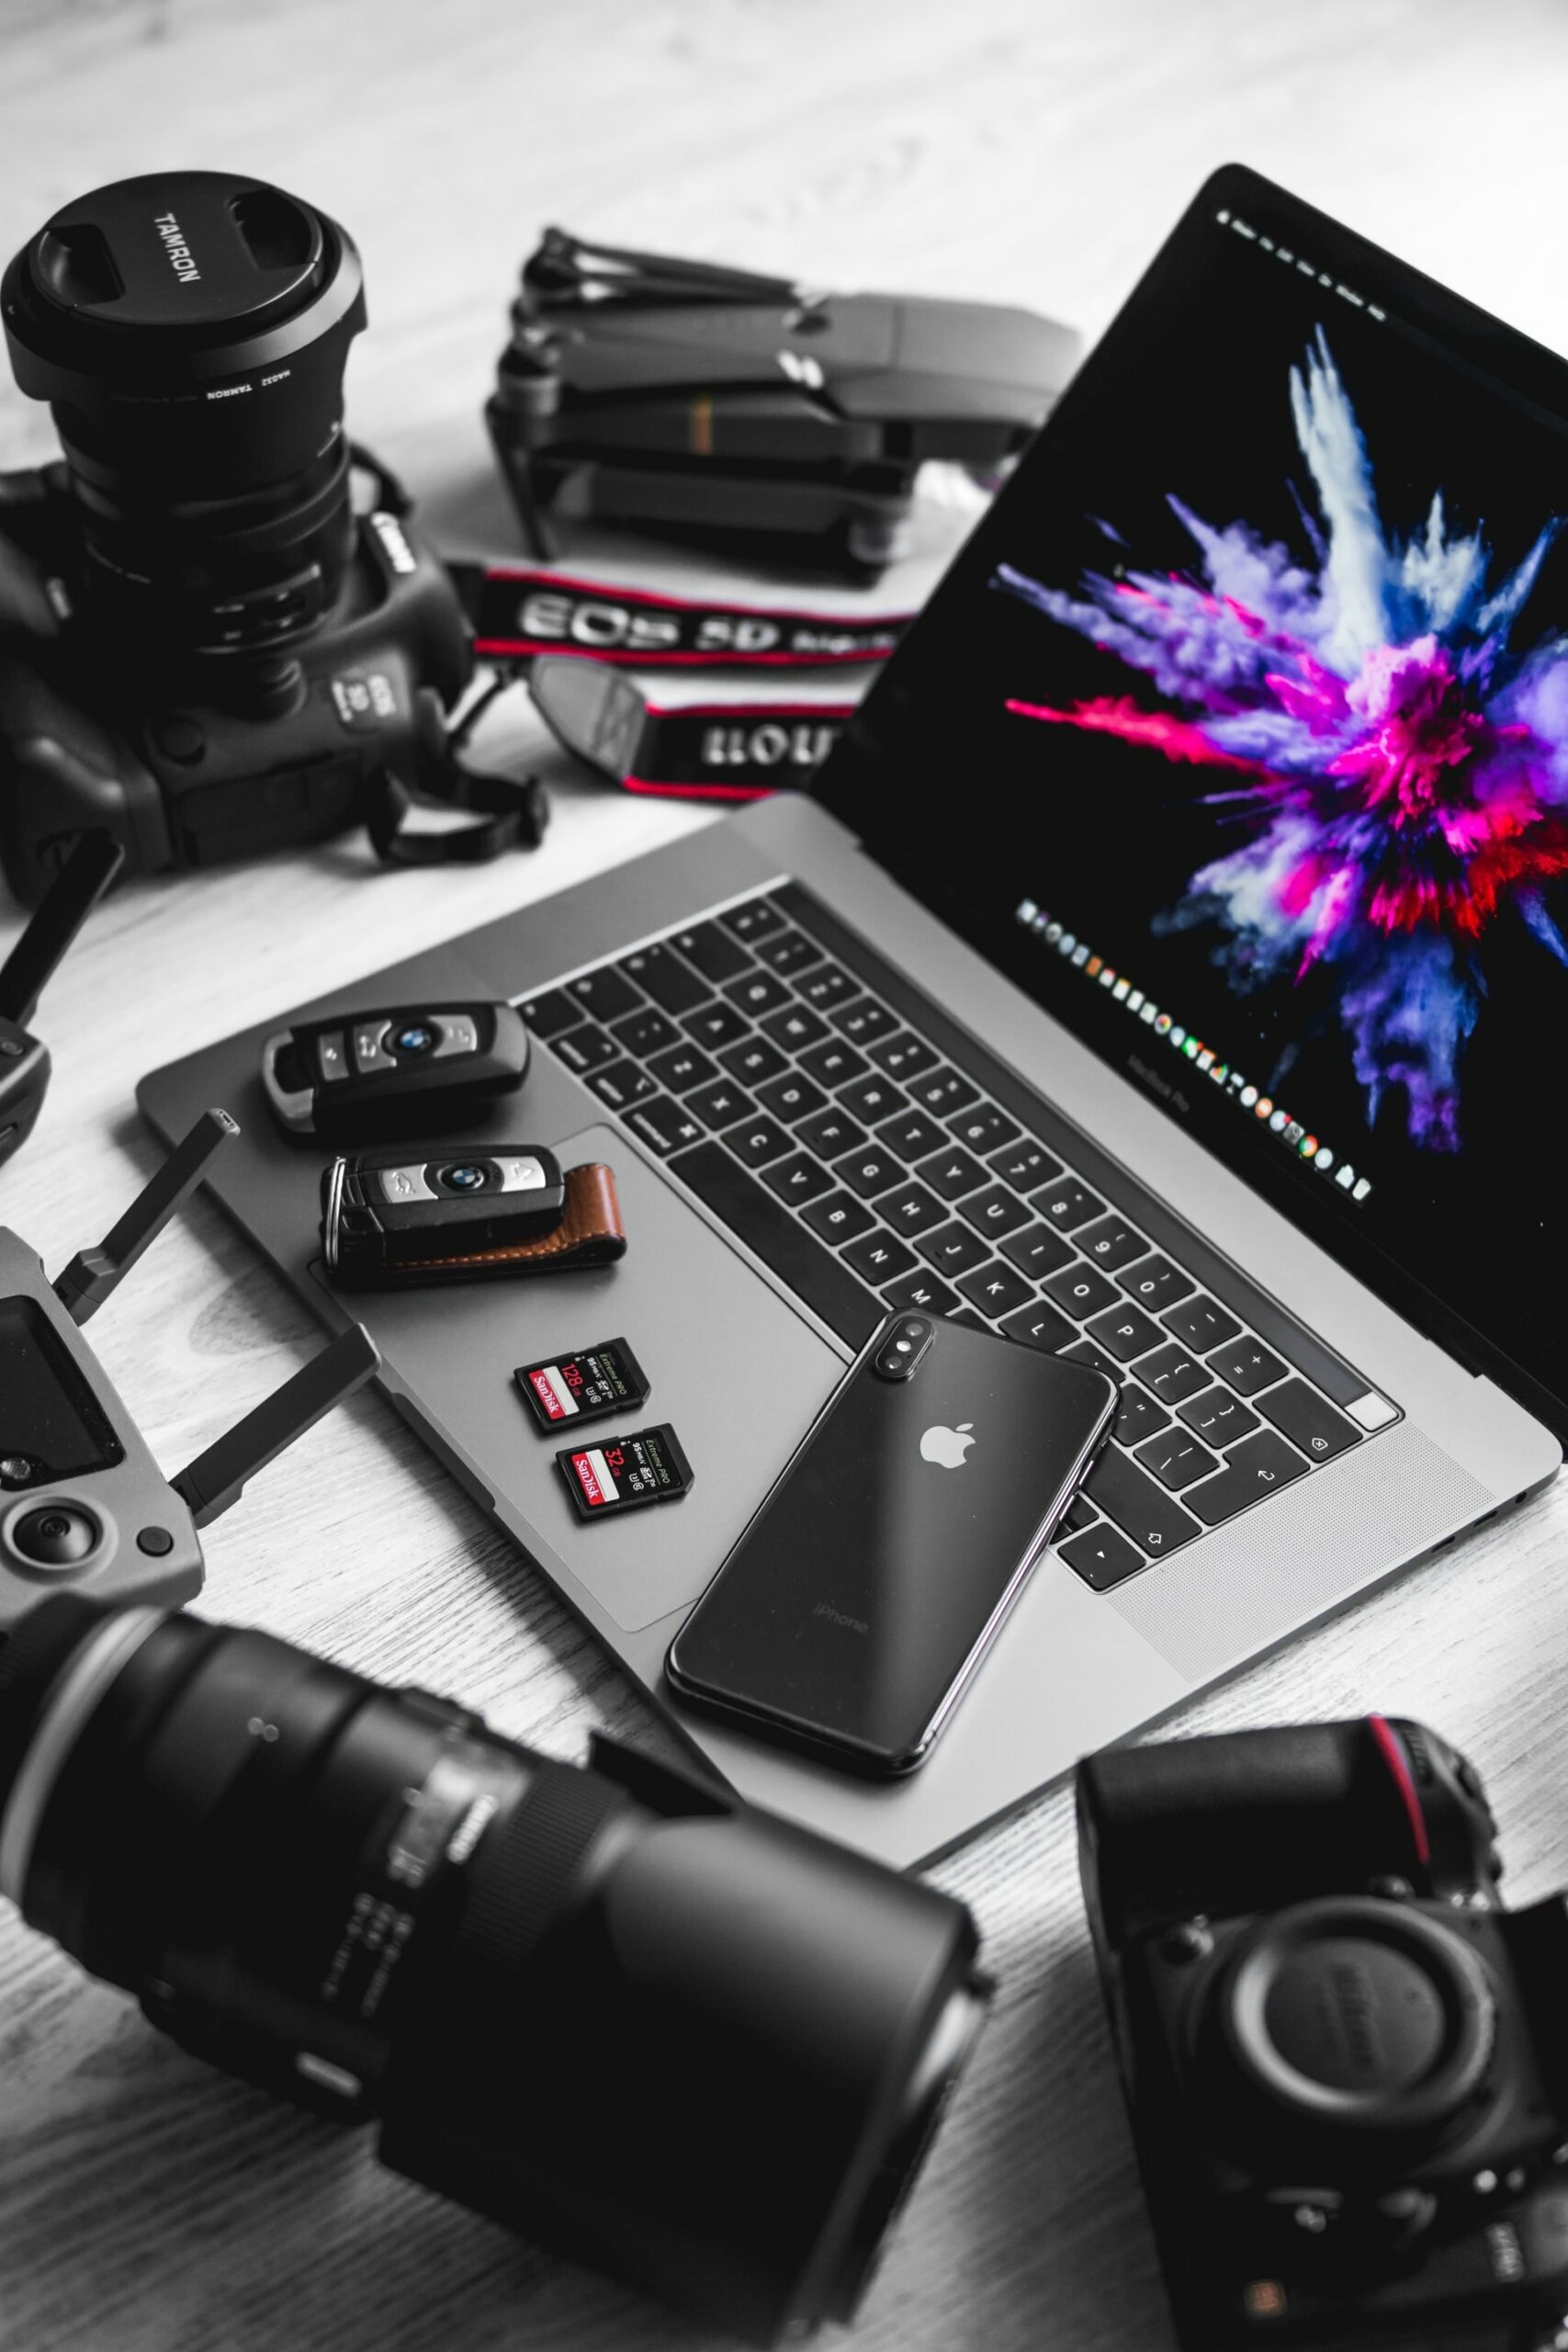 Photo with MacBook Pro, camera equipment, cellphone and car keys